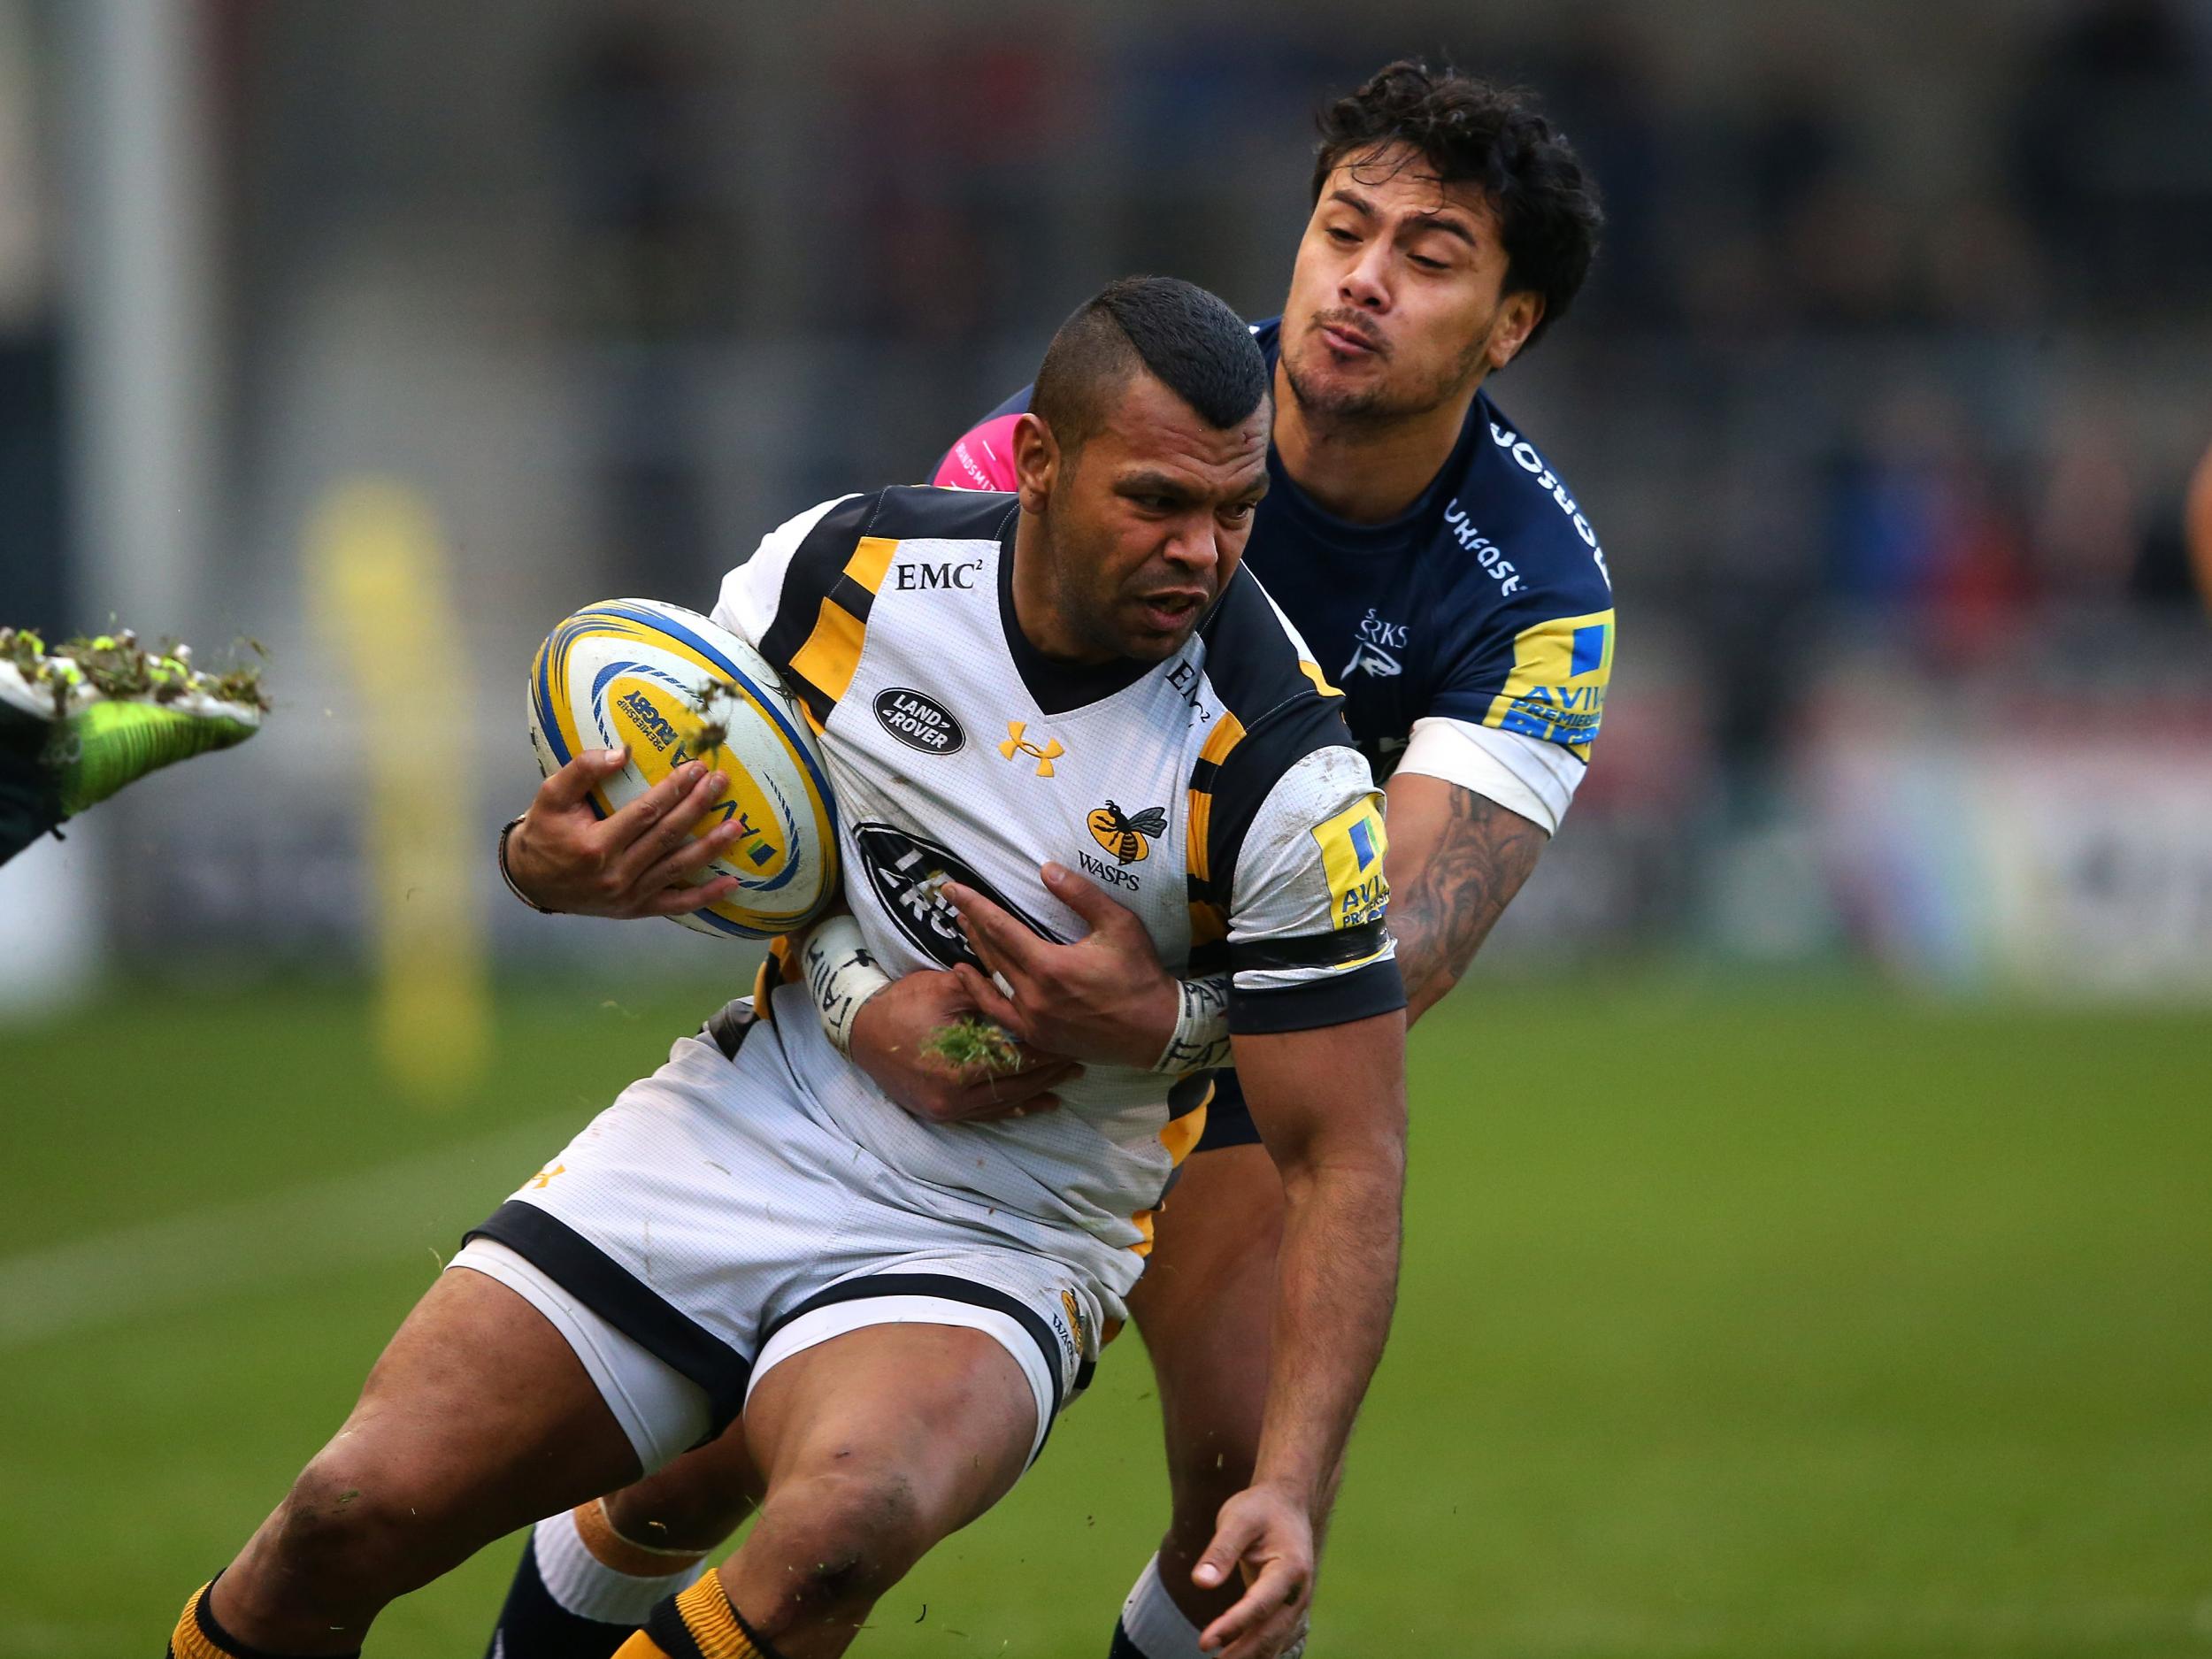 Kurtley Beale of Wasps is tackled by Denny Solomona